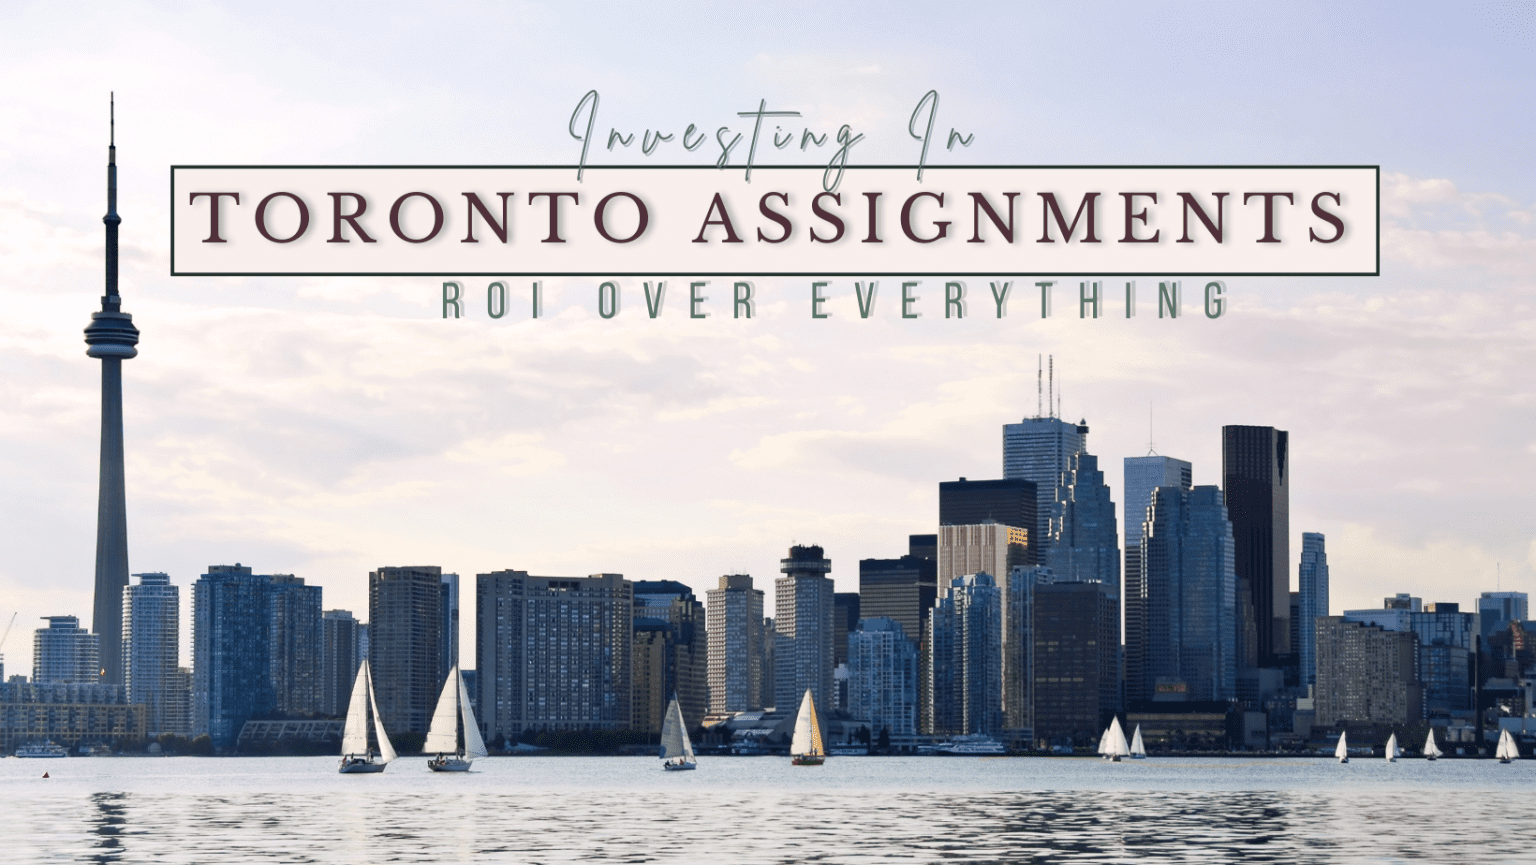 Investing in Toronto Assignments ROI Over Everything